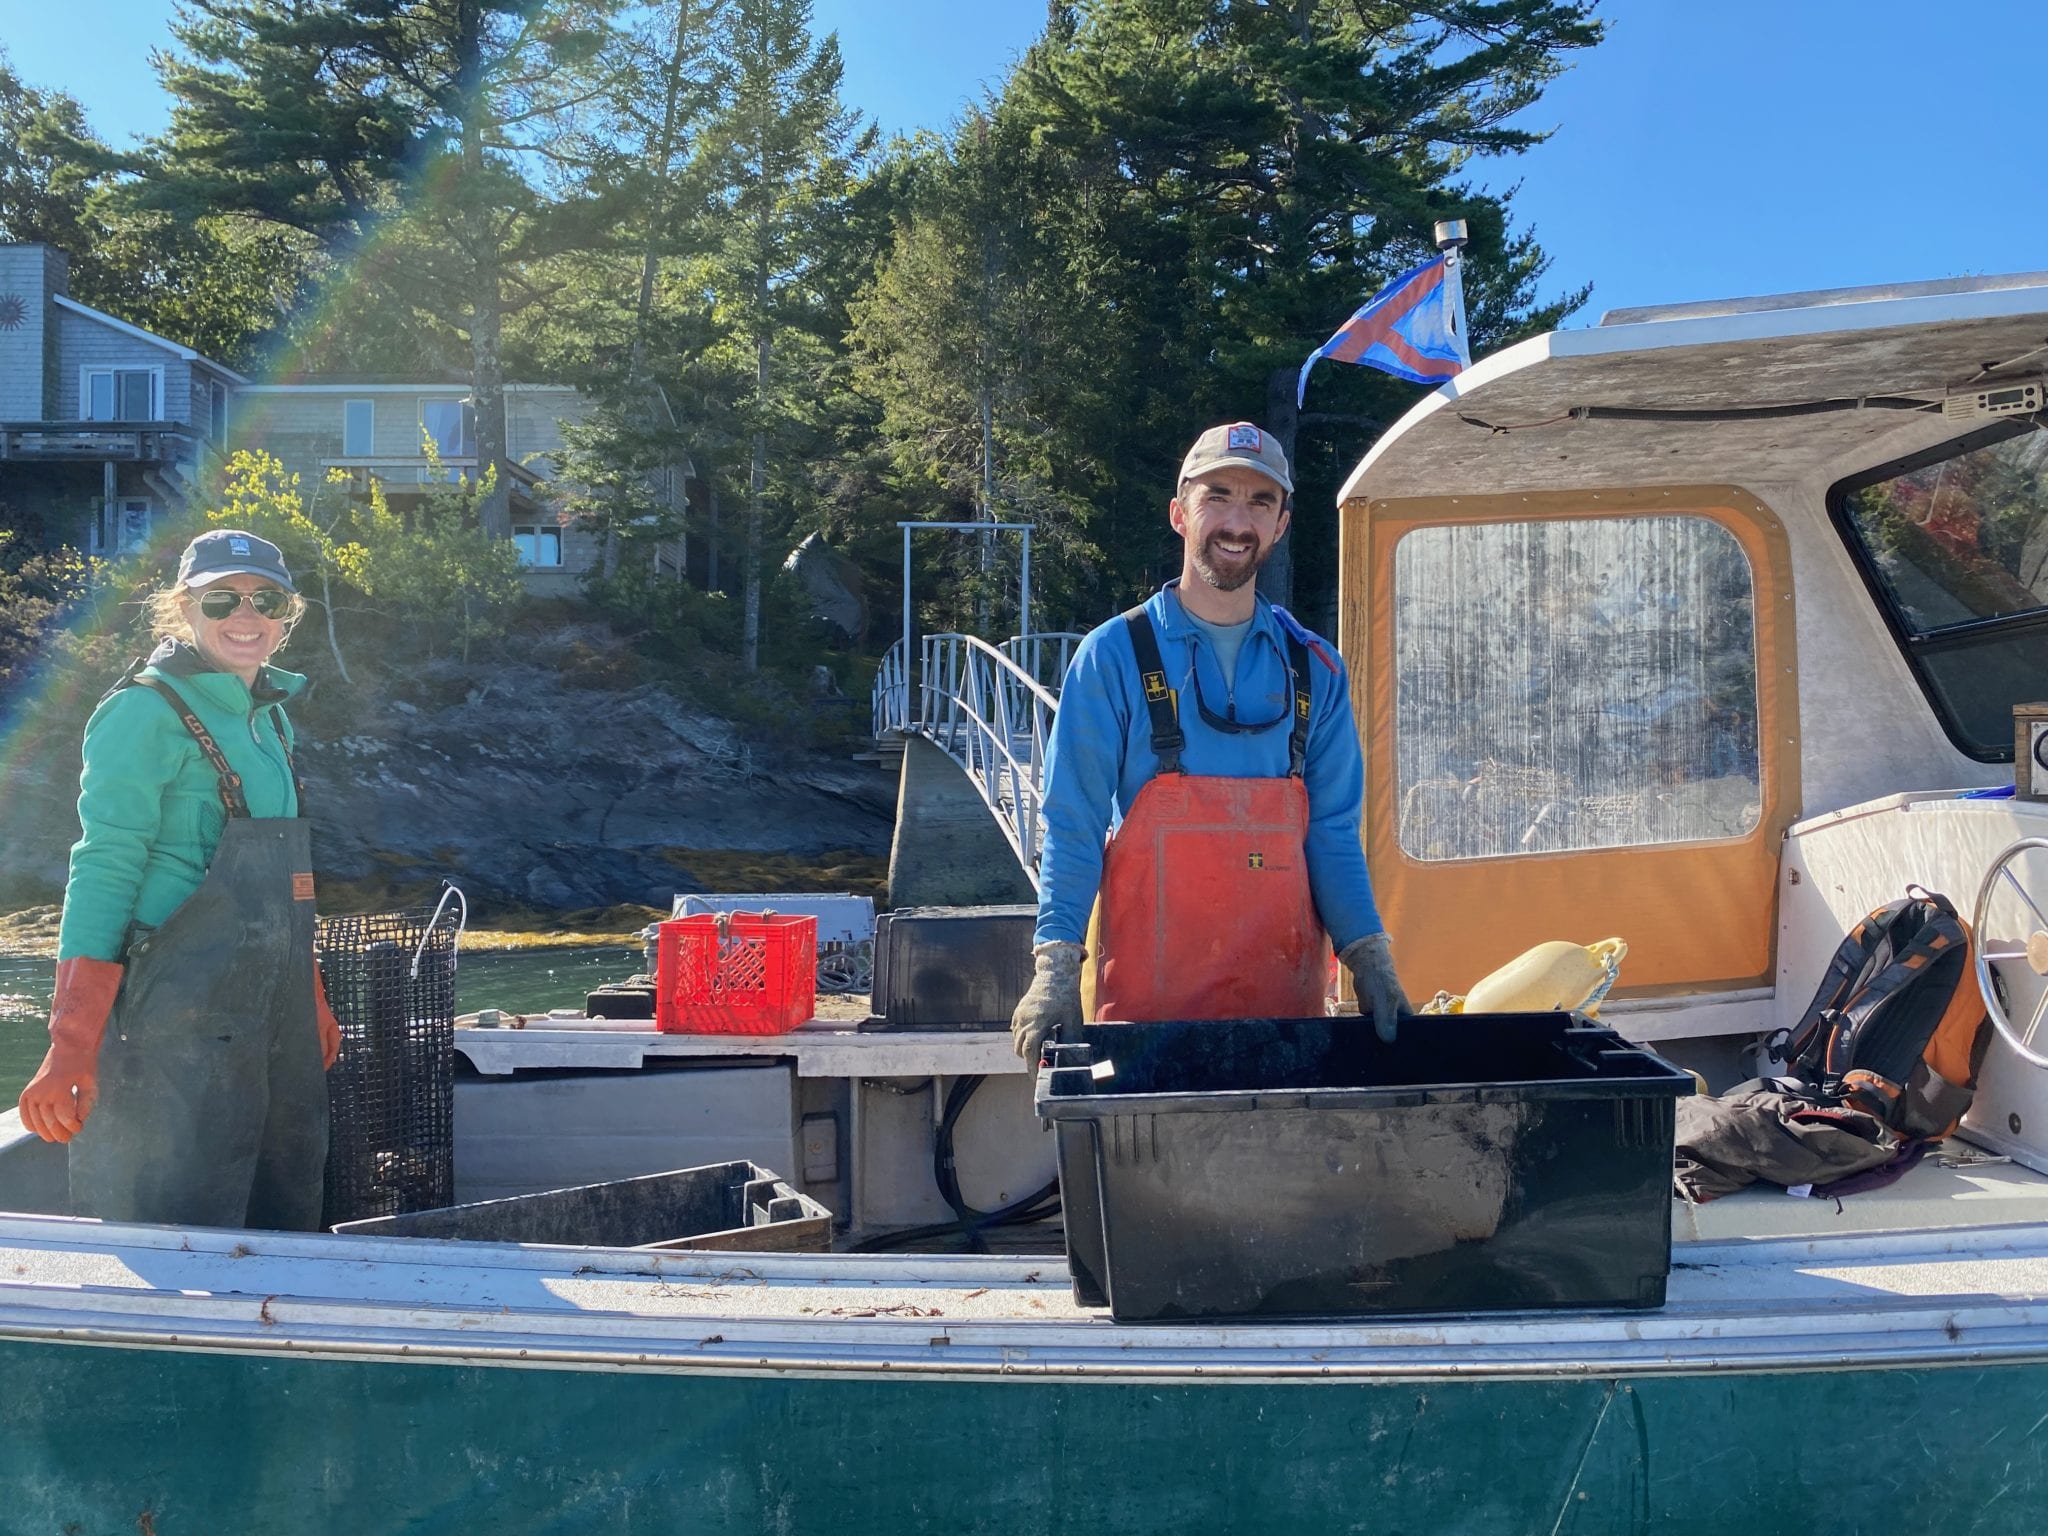 Mill Cove Oyster farmers on boat of New Meadows River, Maine